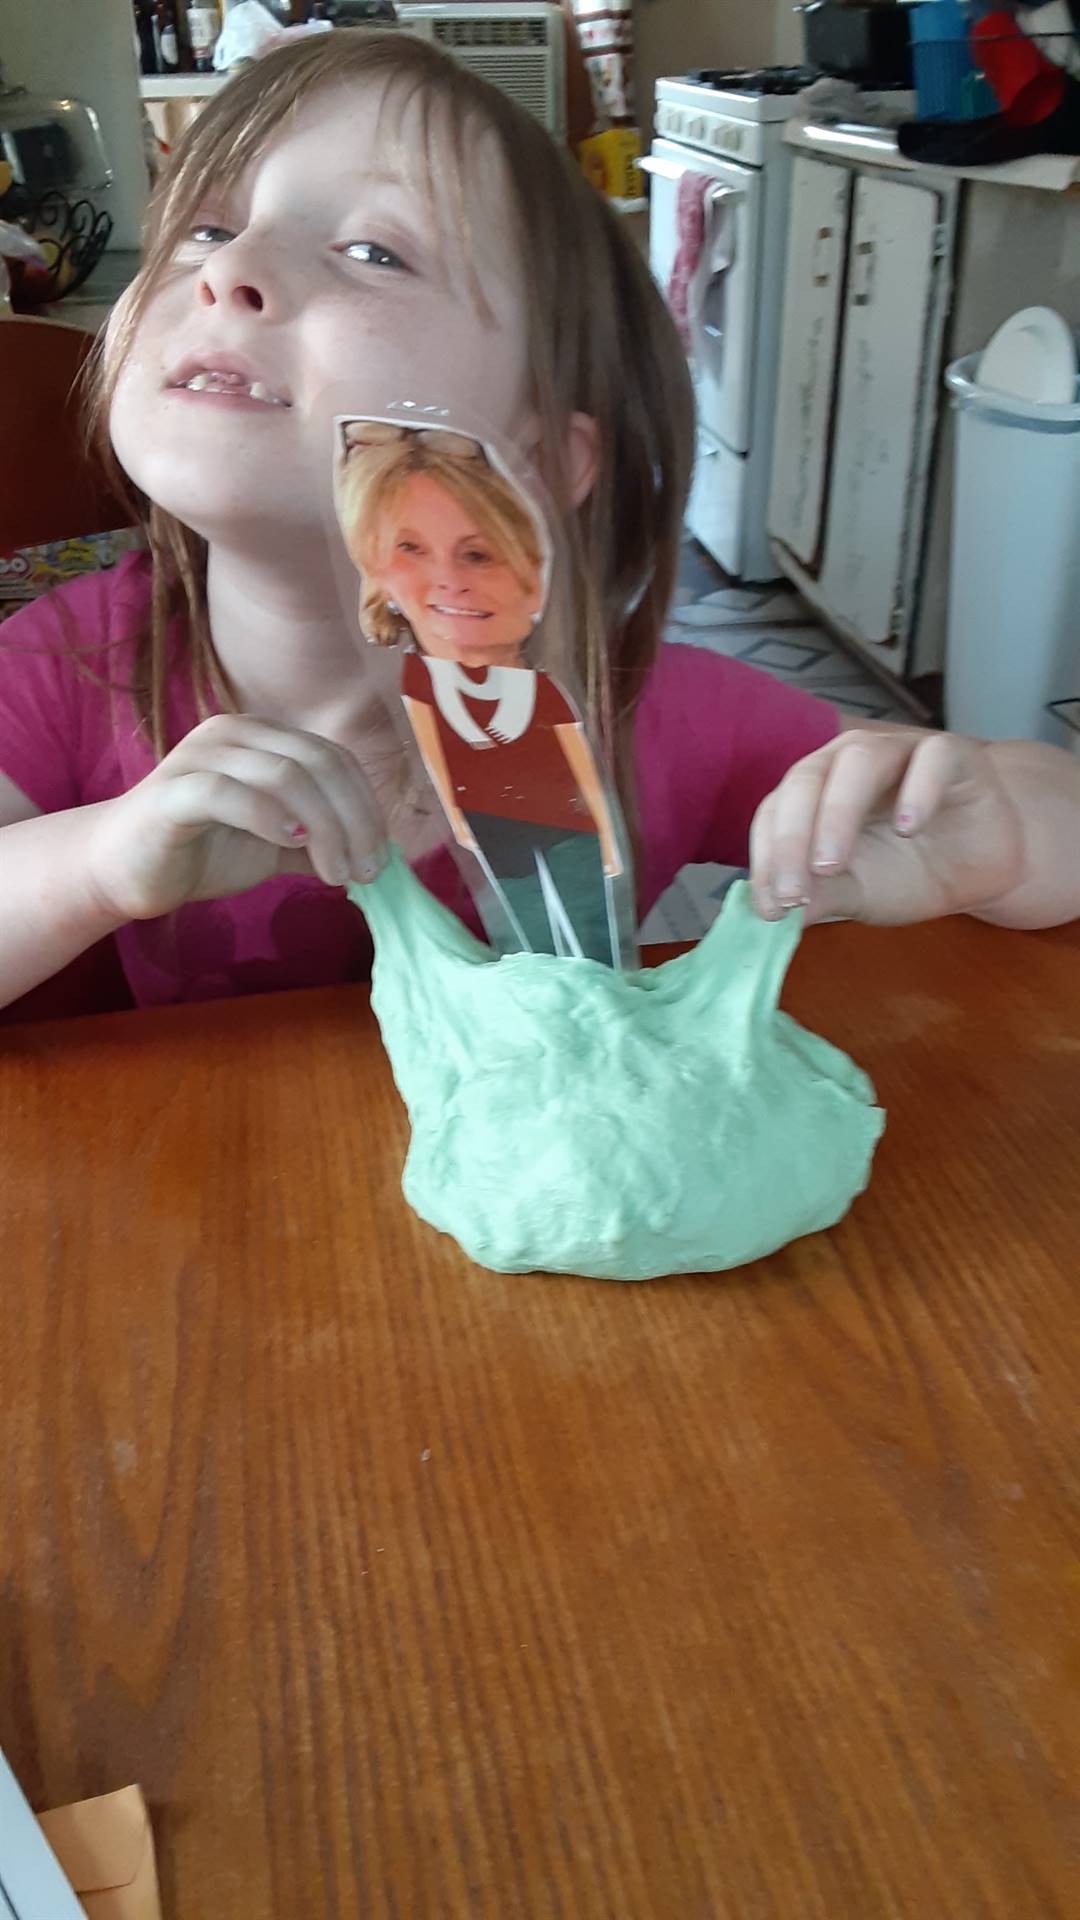 A student makes slime with their paper doll teacher.